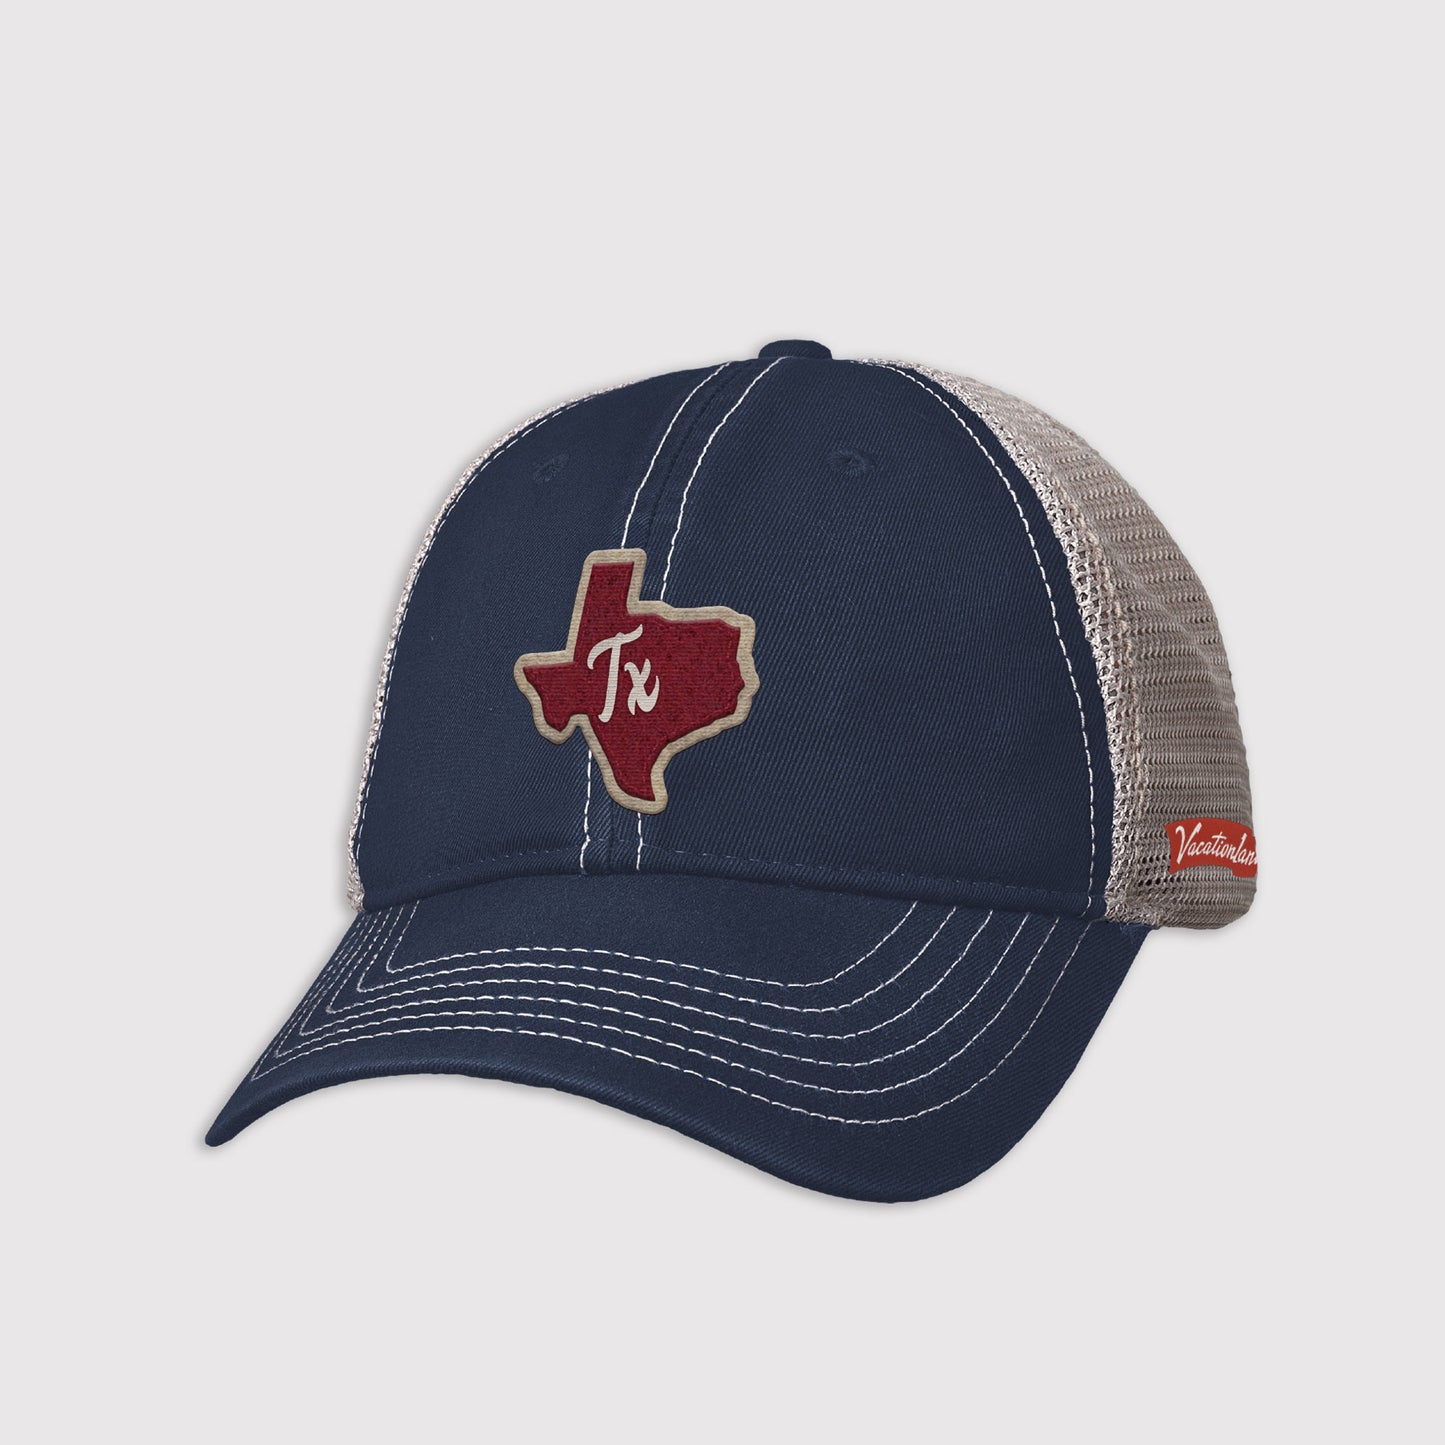 Statewide Pride Hat - Texas